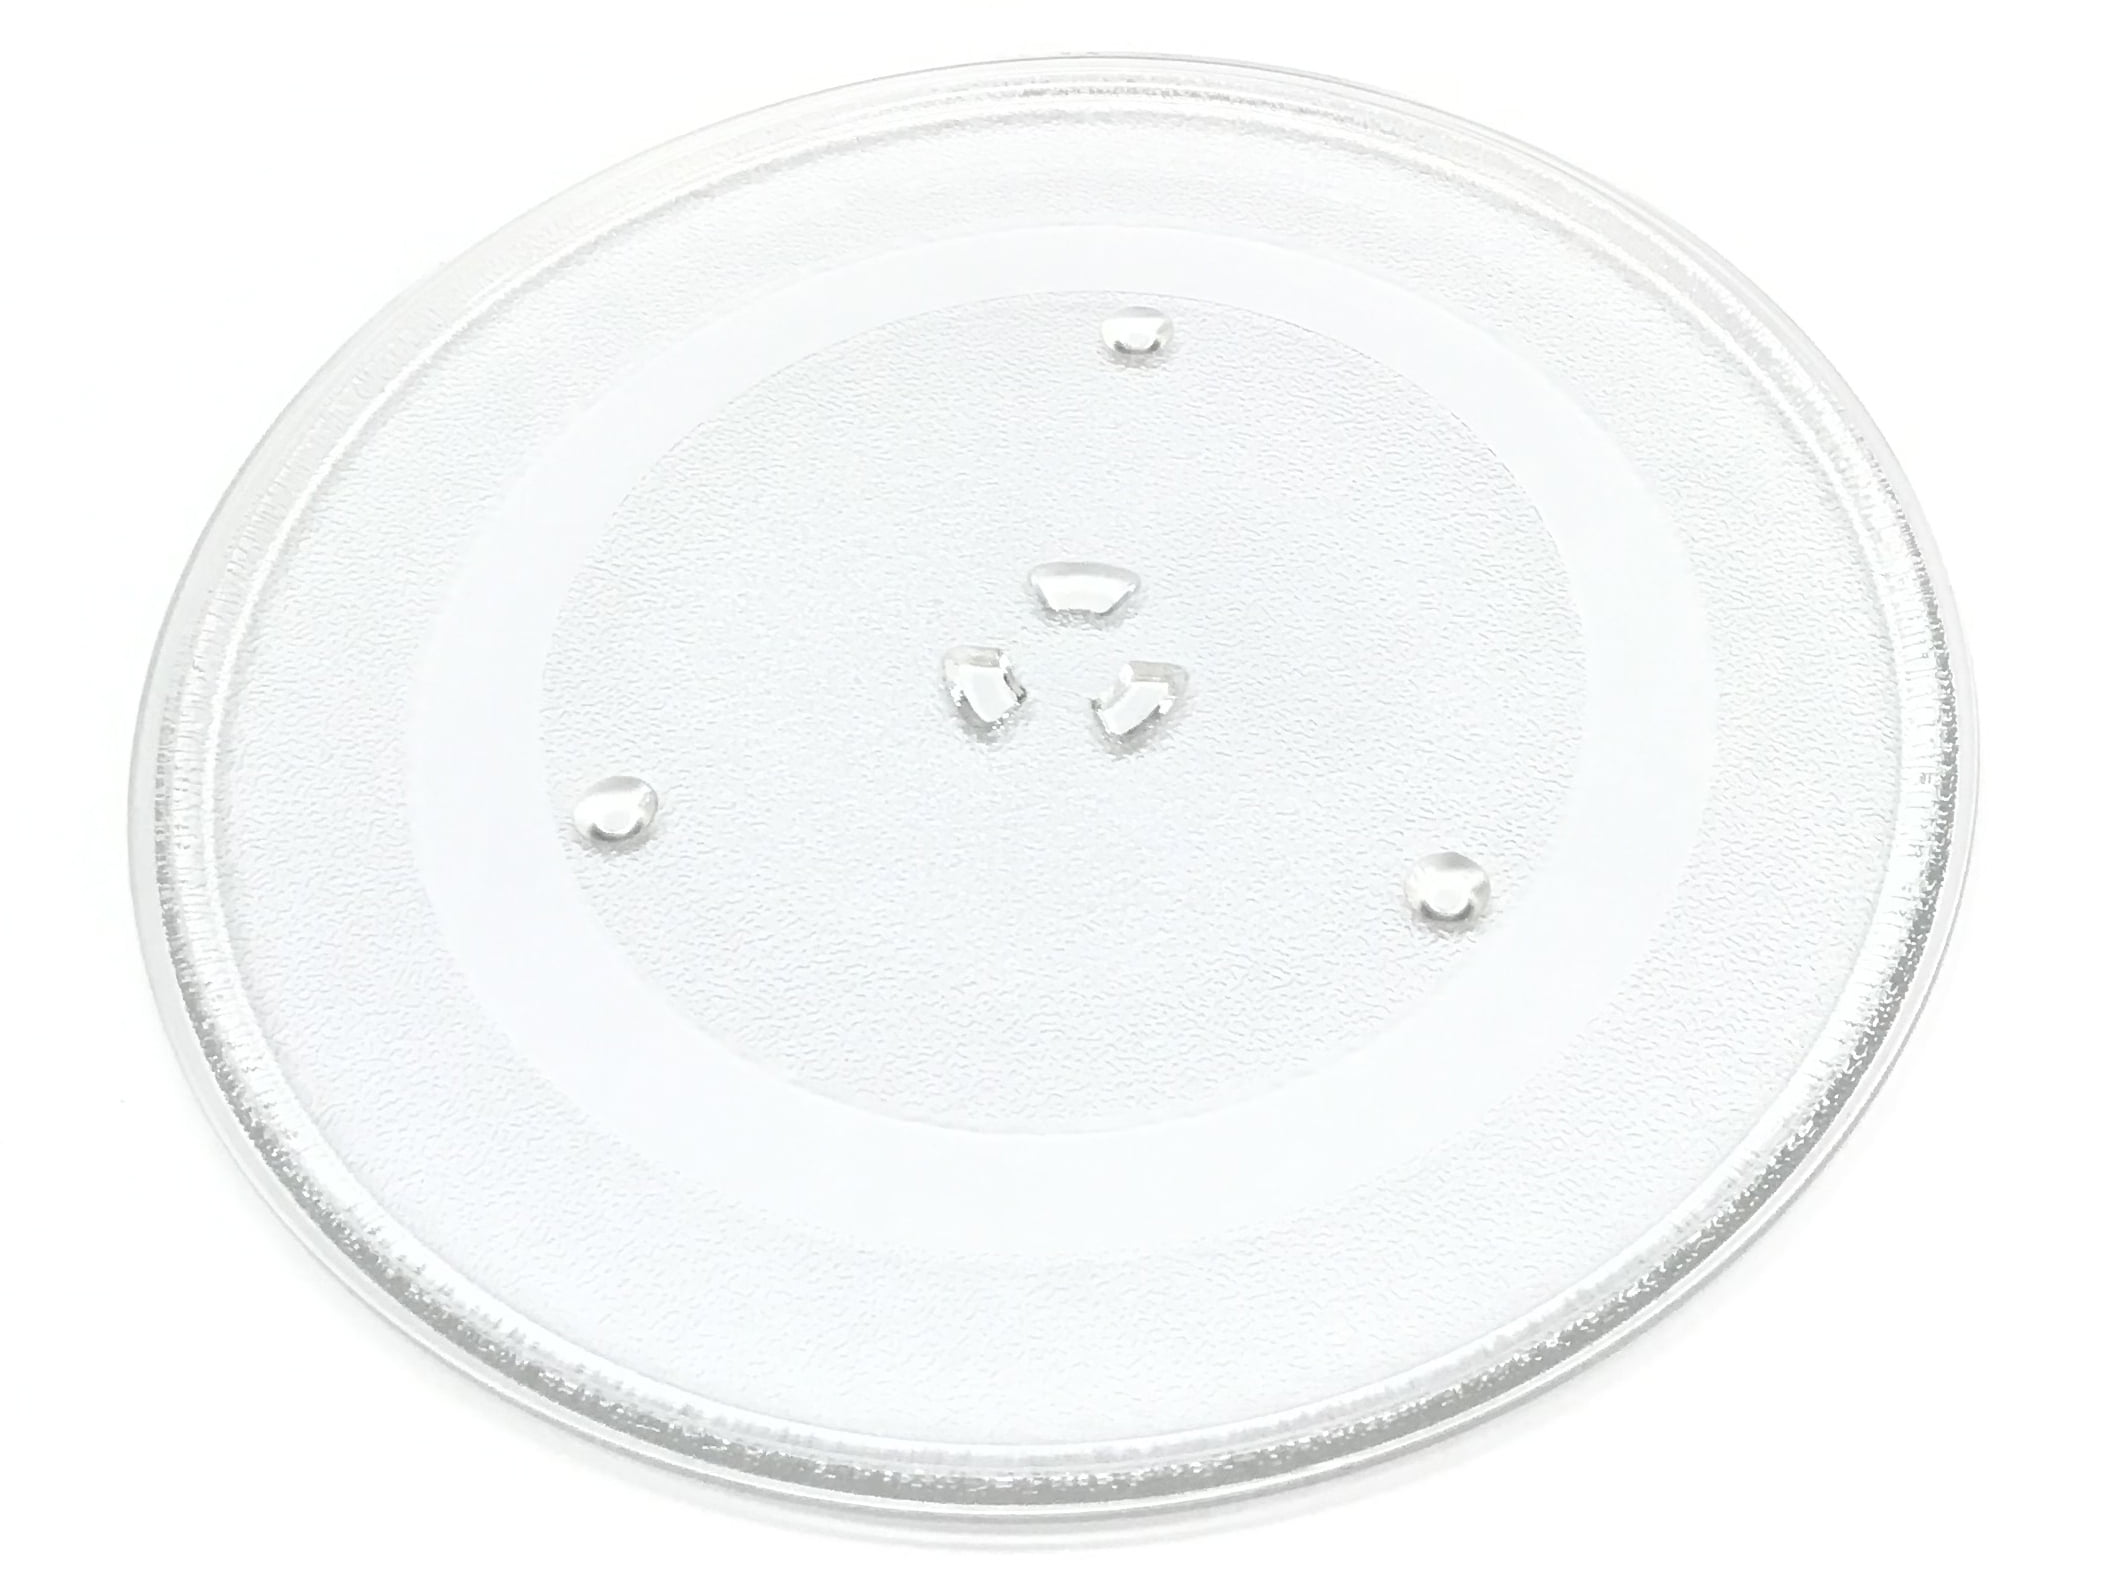 NEW AP3188581 GLASS MICROWAVE TURNTABLE PLATE TRAY EXACT FIT FOR GE 